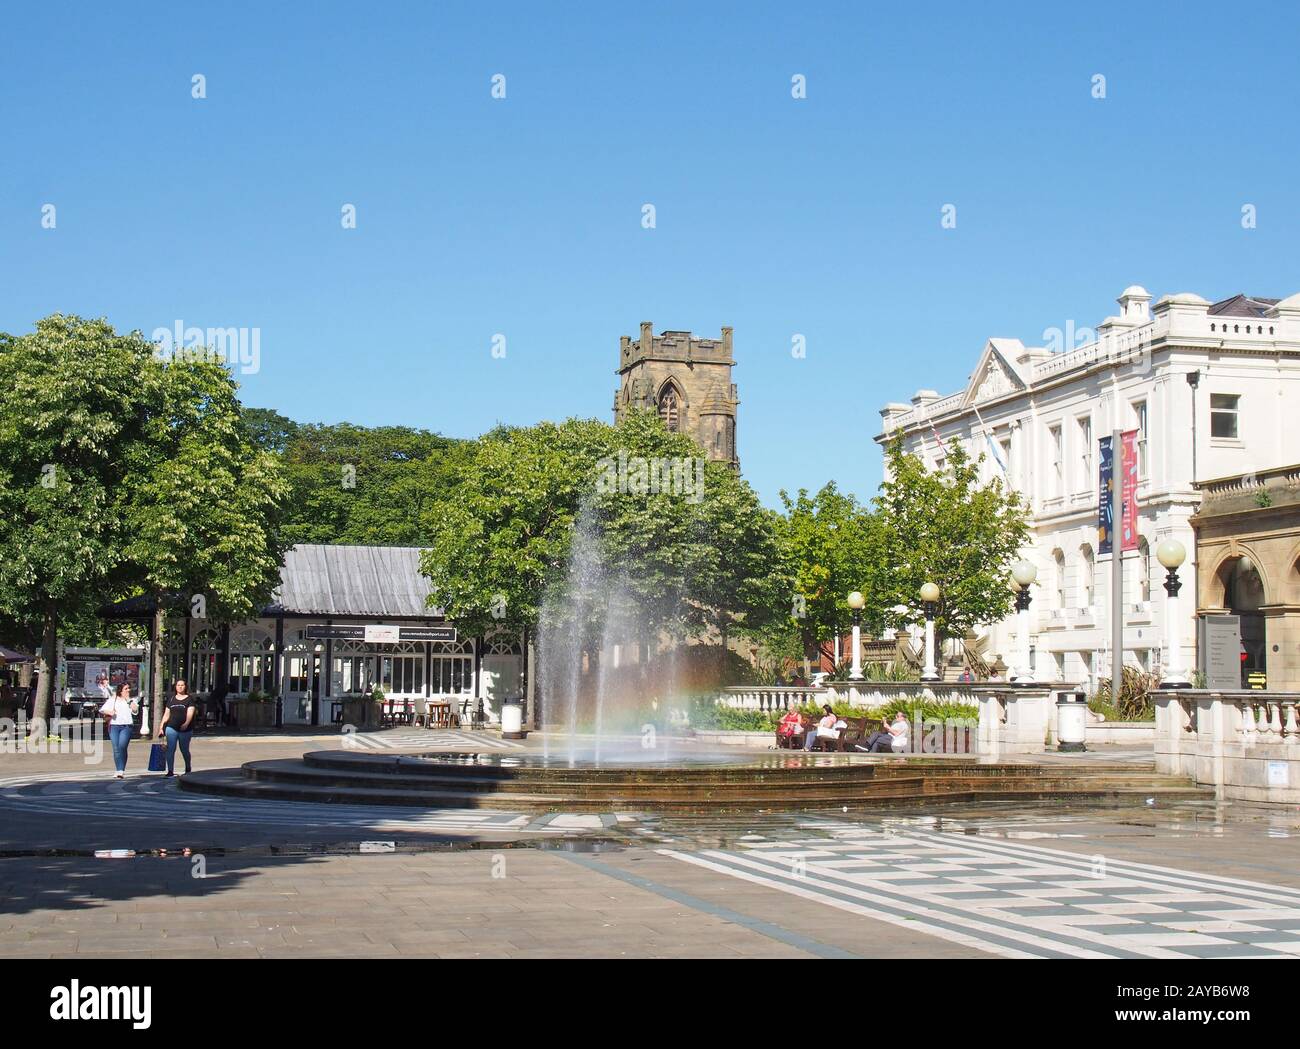 a street view of the square and cafe building with the town hall in southport merseyside Stock Photo